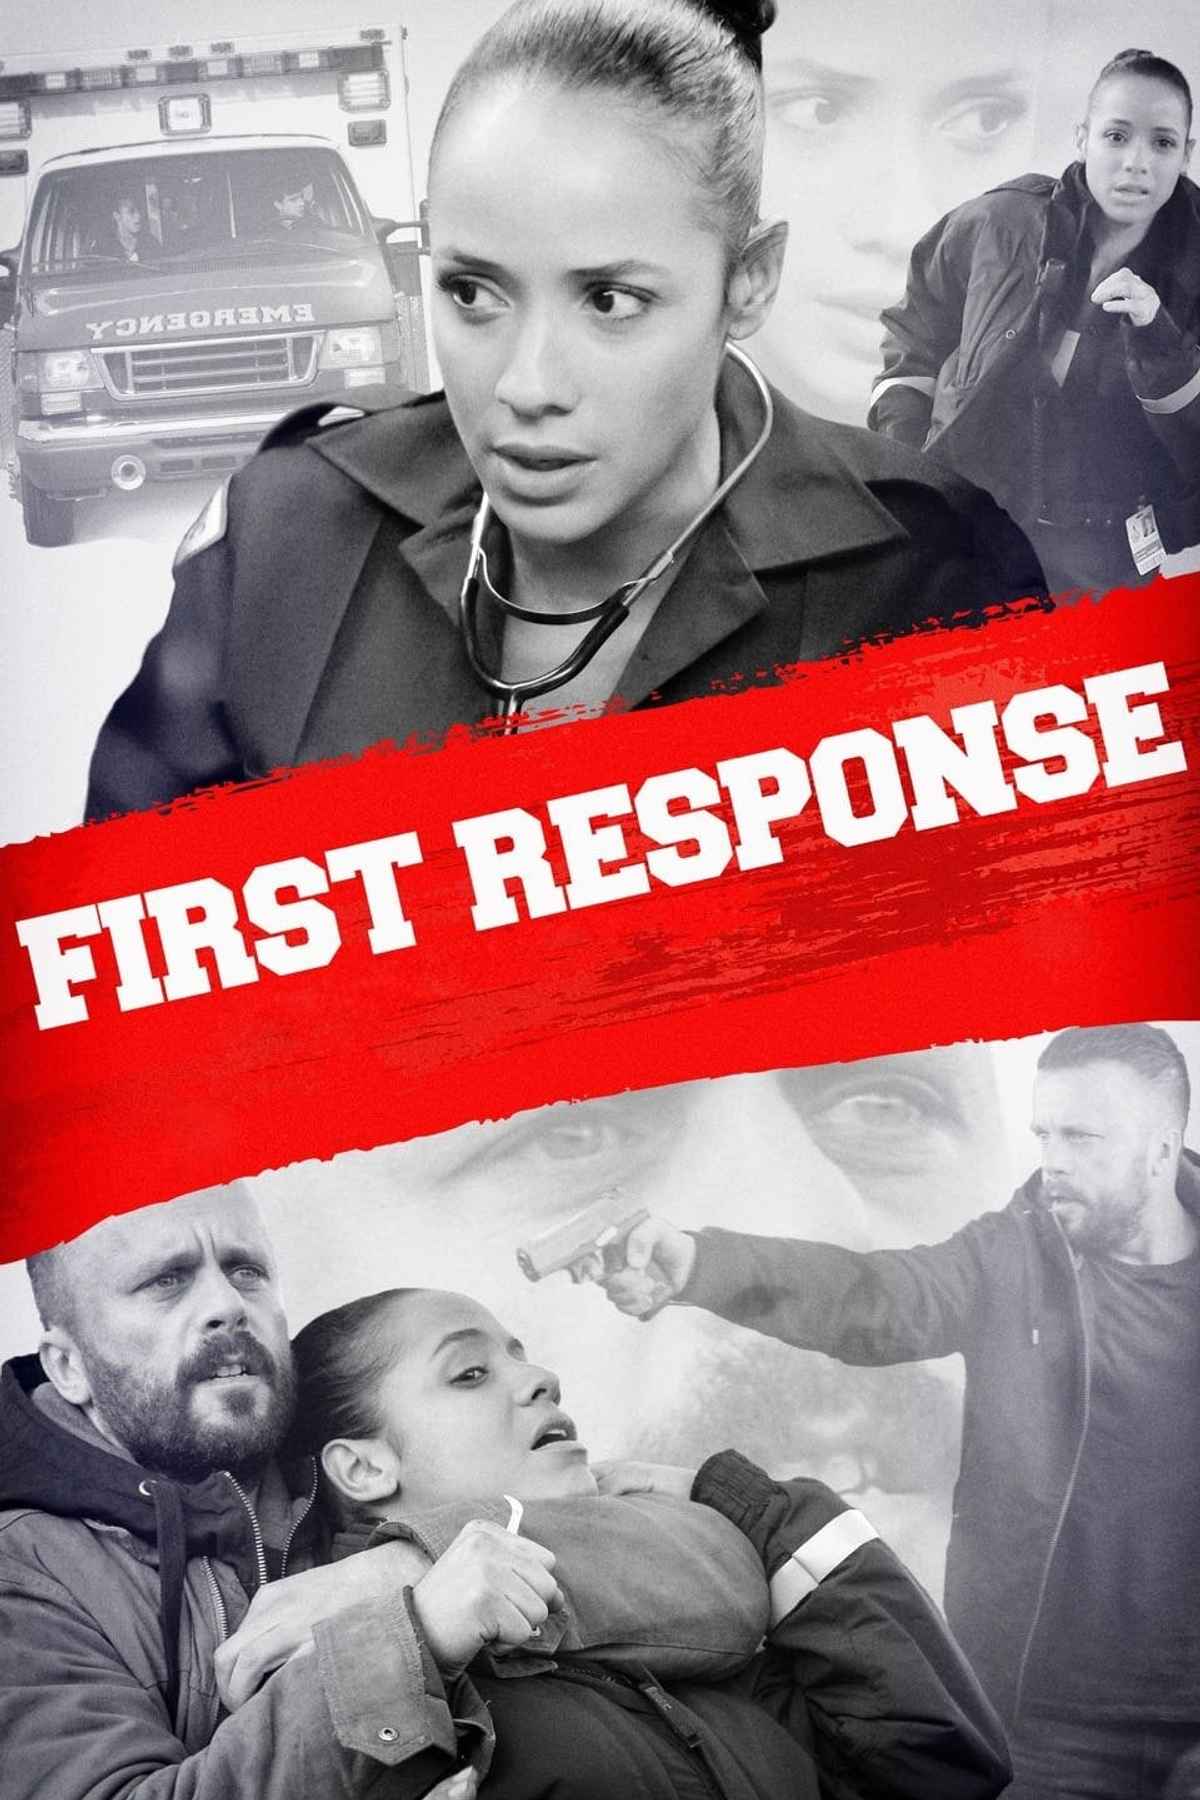 First Response Movie (2015) Release Date, Cast, Trailer, Songs